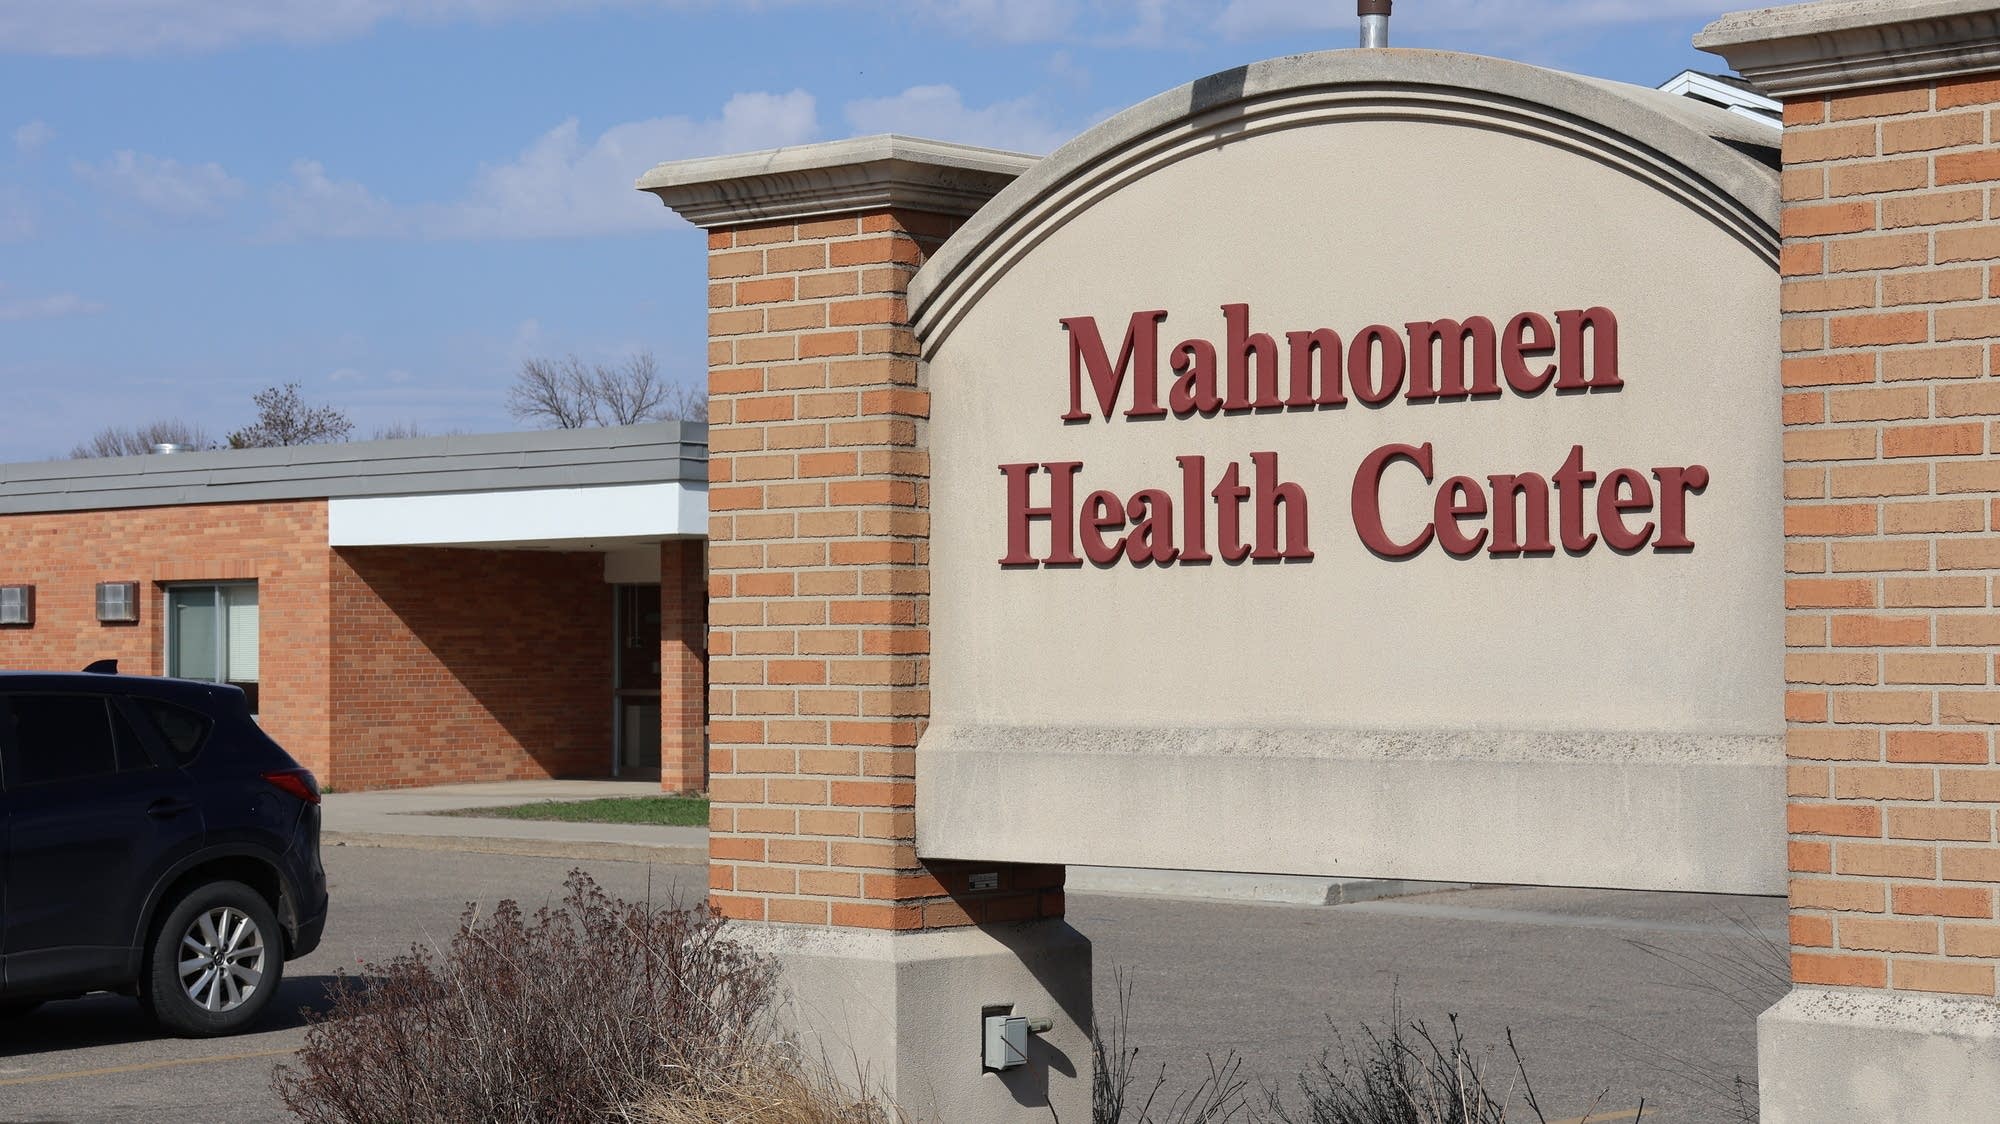 In money-saving move, Mahnomen hospital shutters inpatient beds, keeps outpatient and emergency care